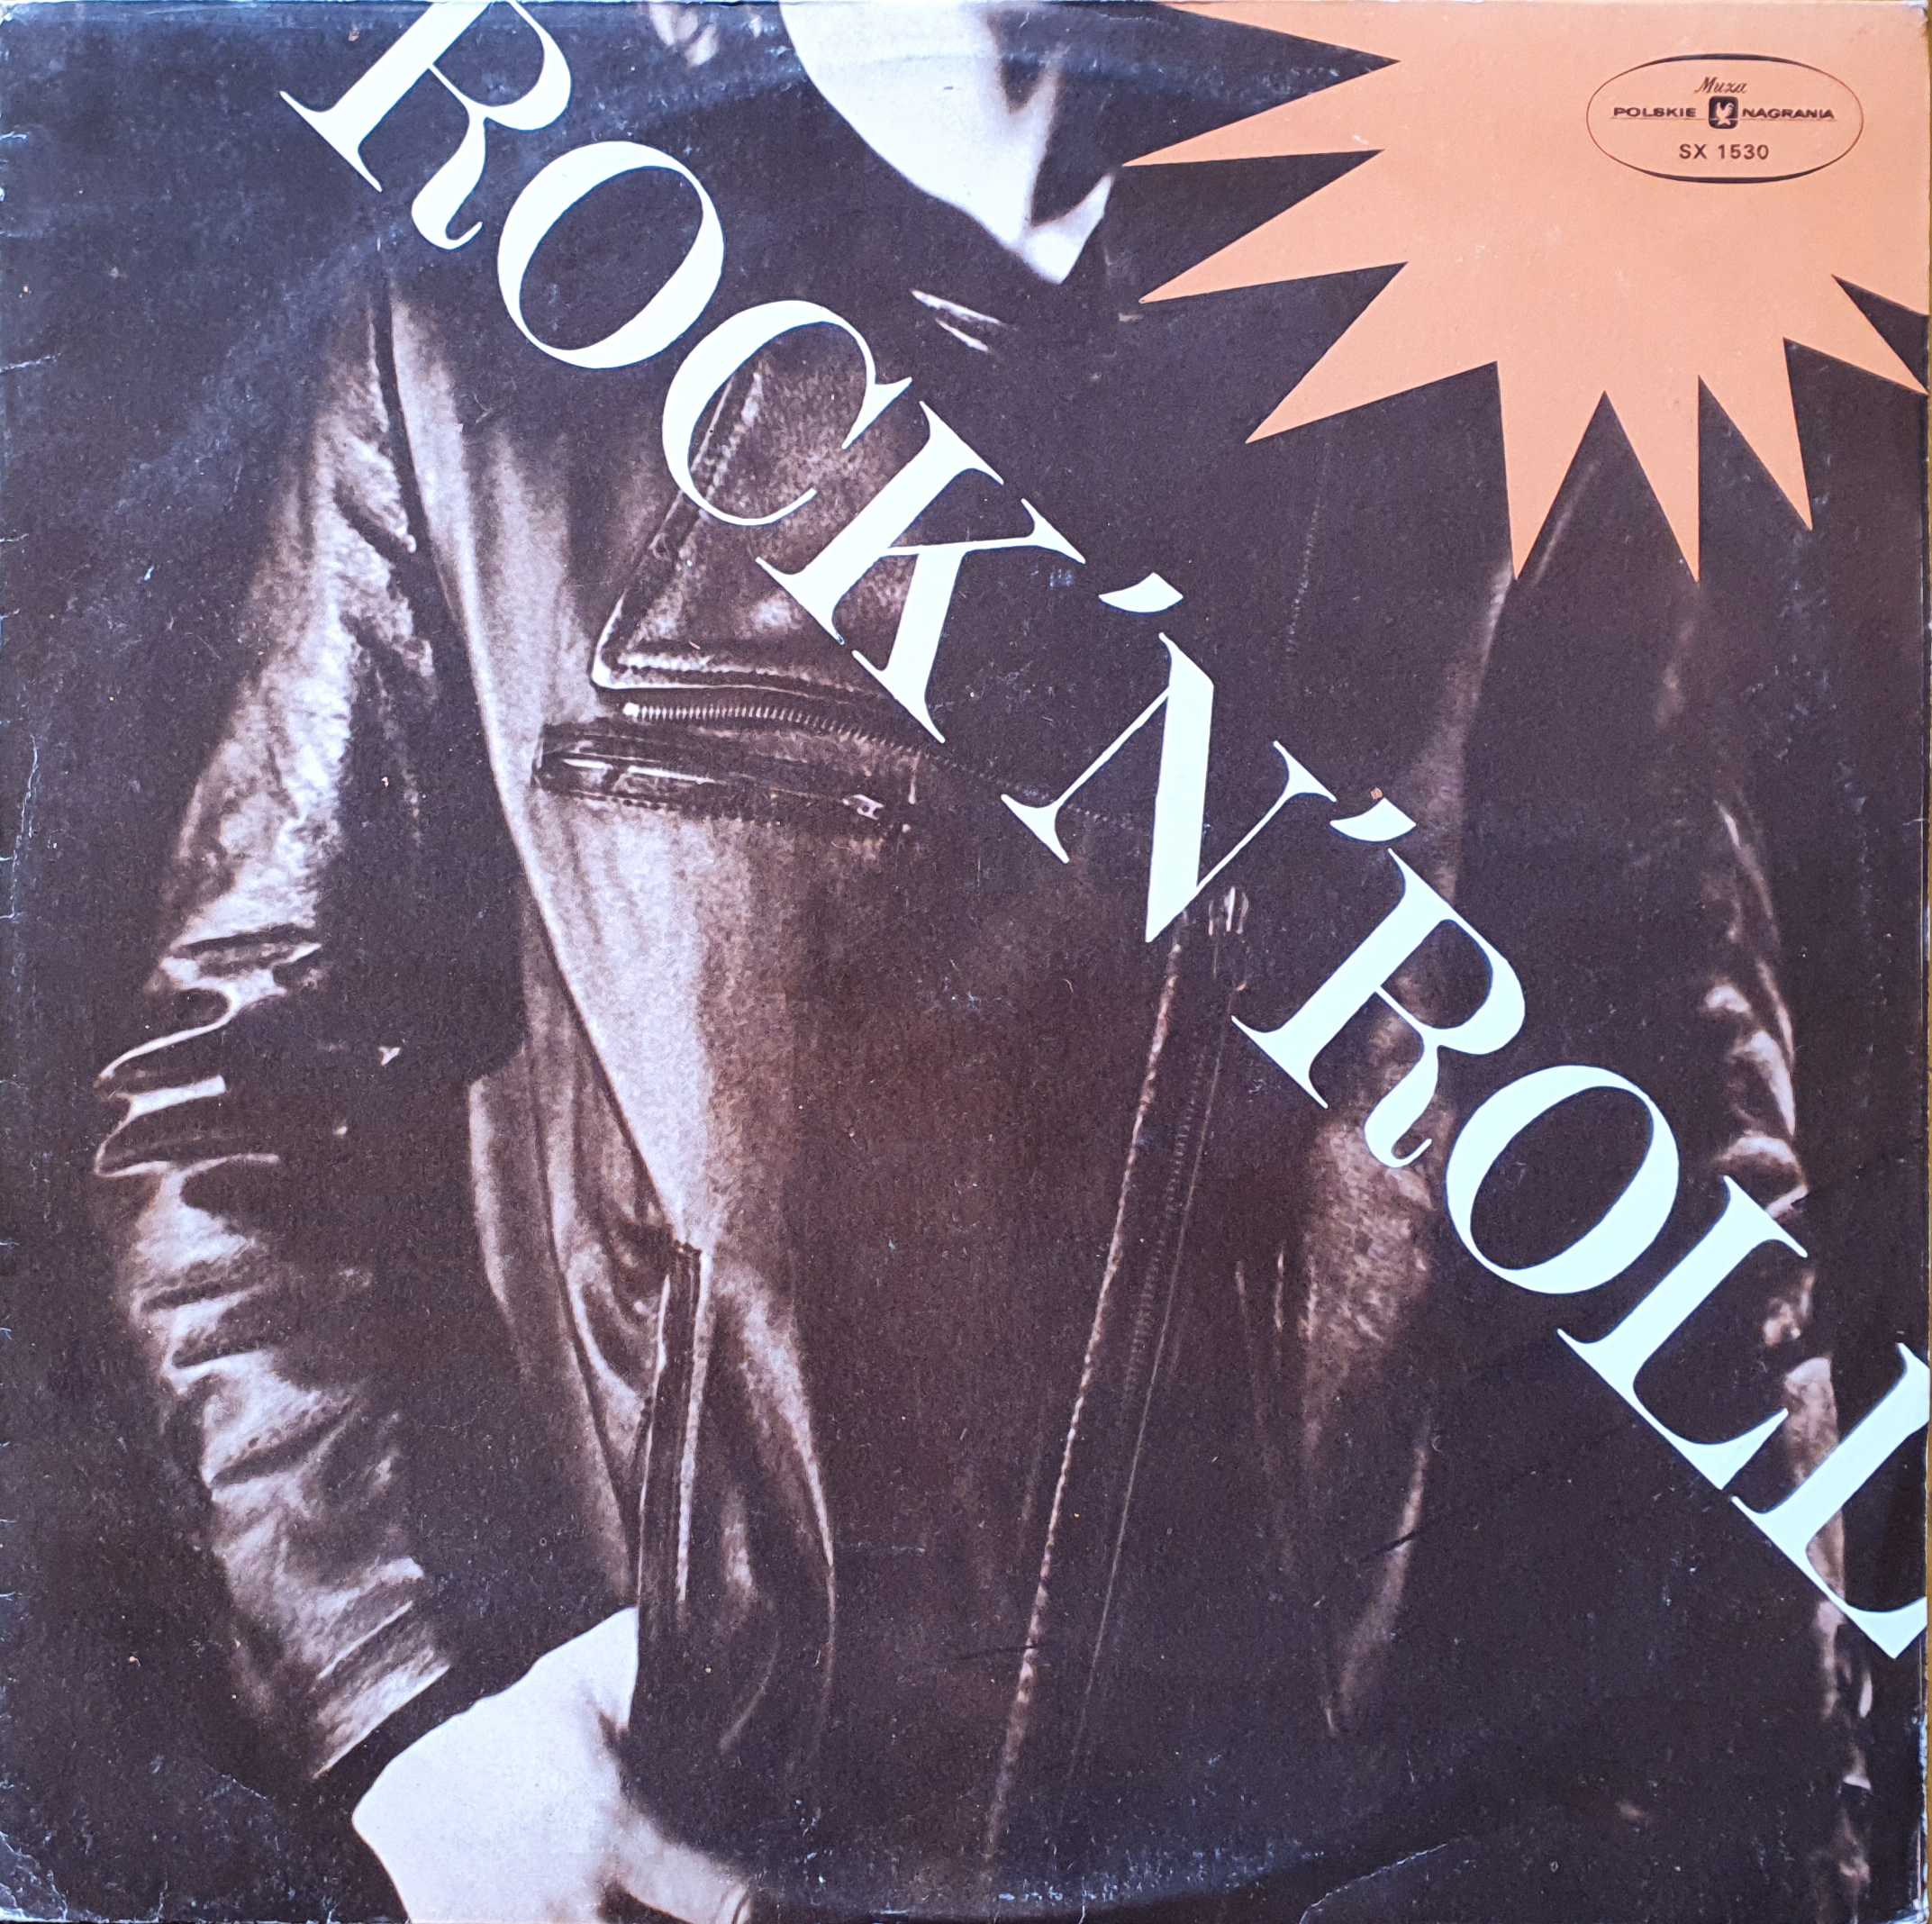 Picture of SX 1530 Rock 'n' roll - Polish import by artist Various from the BBC albums - Records and Tapes library